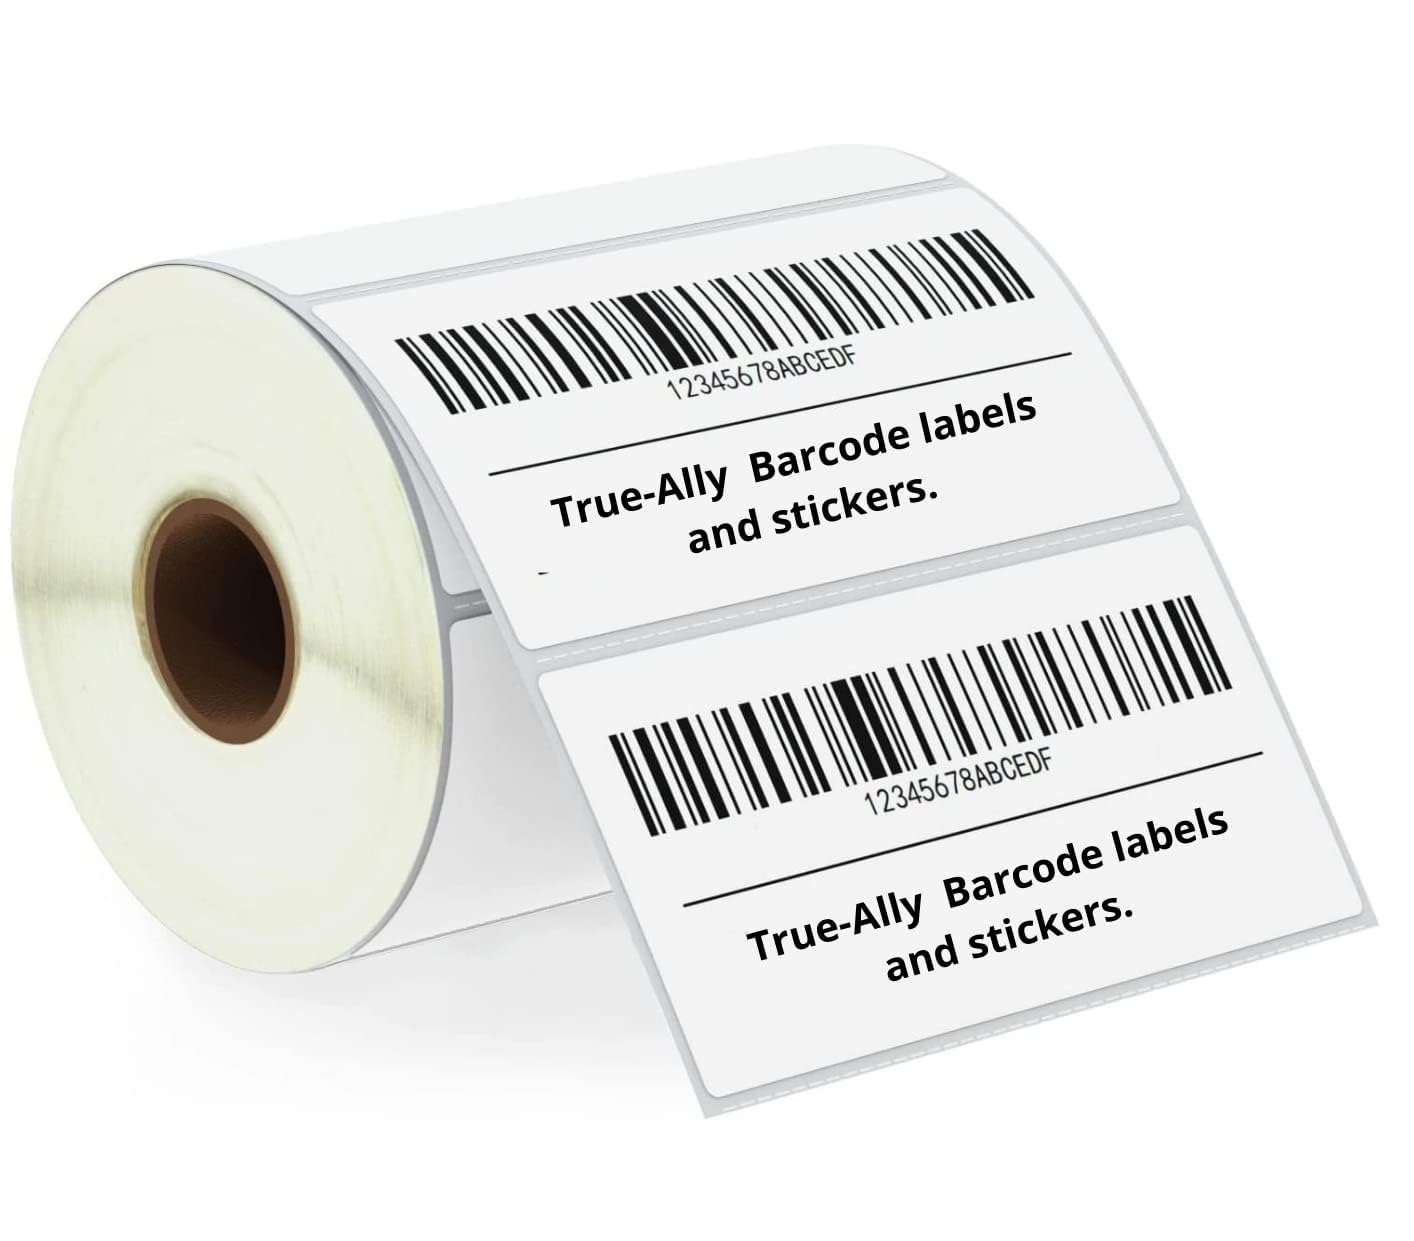 KIYA 65X35 Barcode Label Sticker  - 65mm x 35mm - 1 Ups - 1000 Labels Per Roll - White Self Adhesive Sticker for Printing Barcoding (1 Roll Per Pack (1000 Labels))